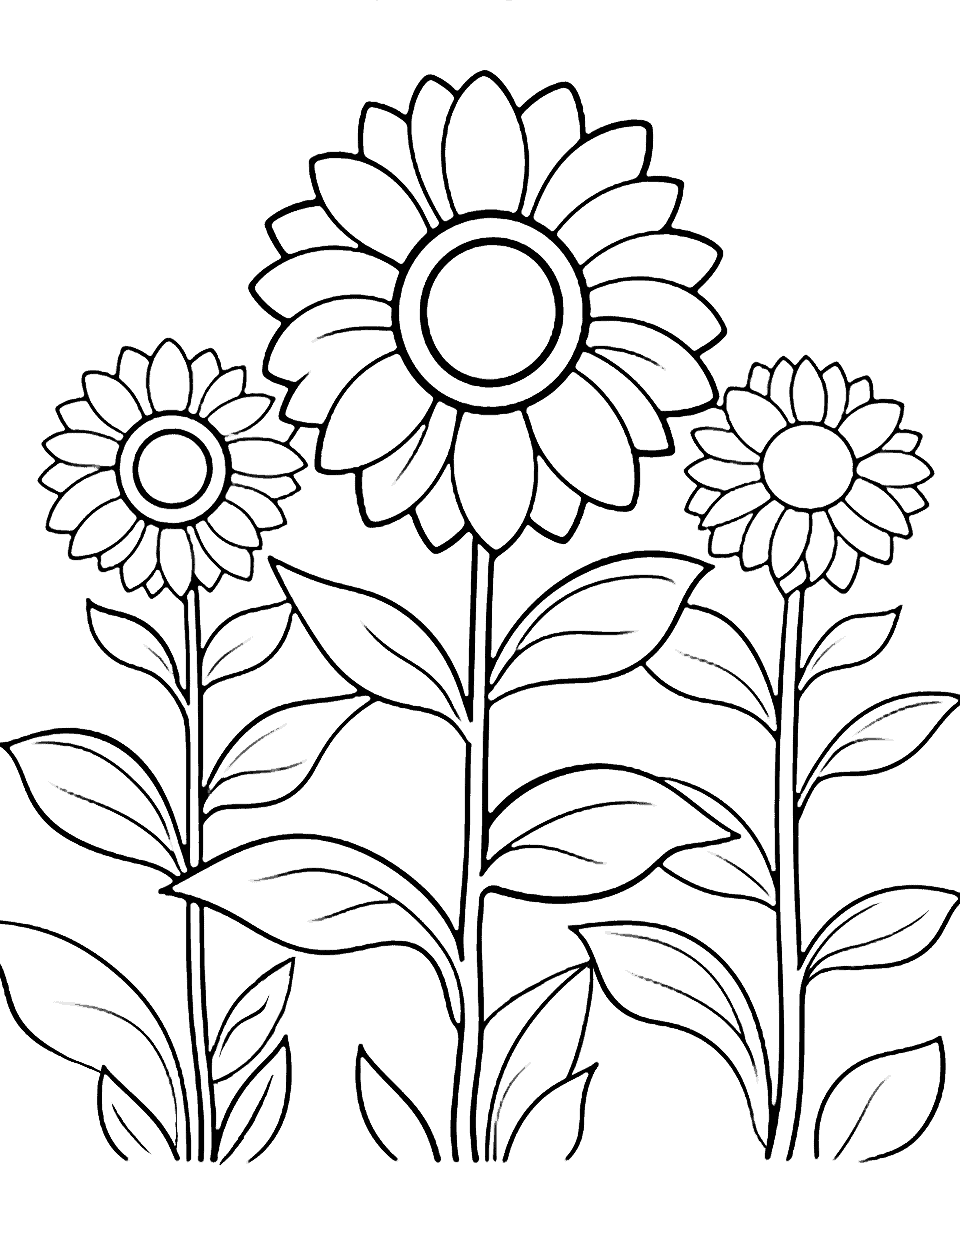 Cute Sunflower Field Flower Coloring Page - A coloring page featuring a cute, cartoonish field of sunflowers.